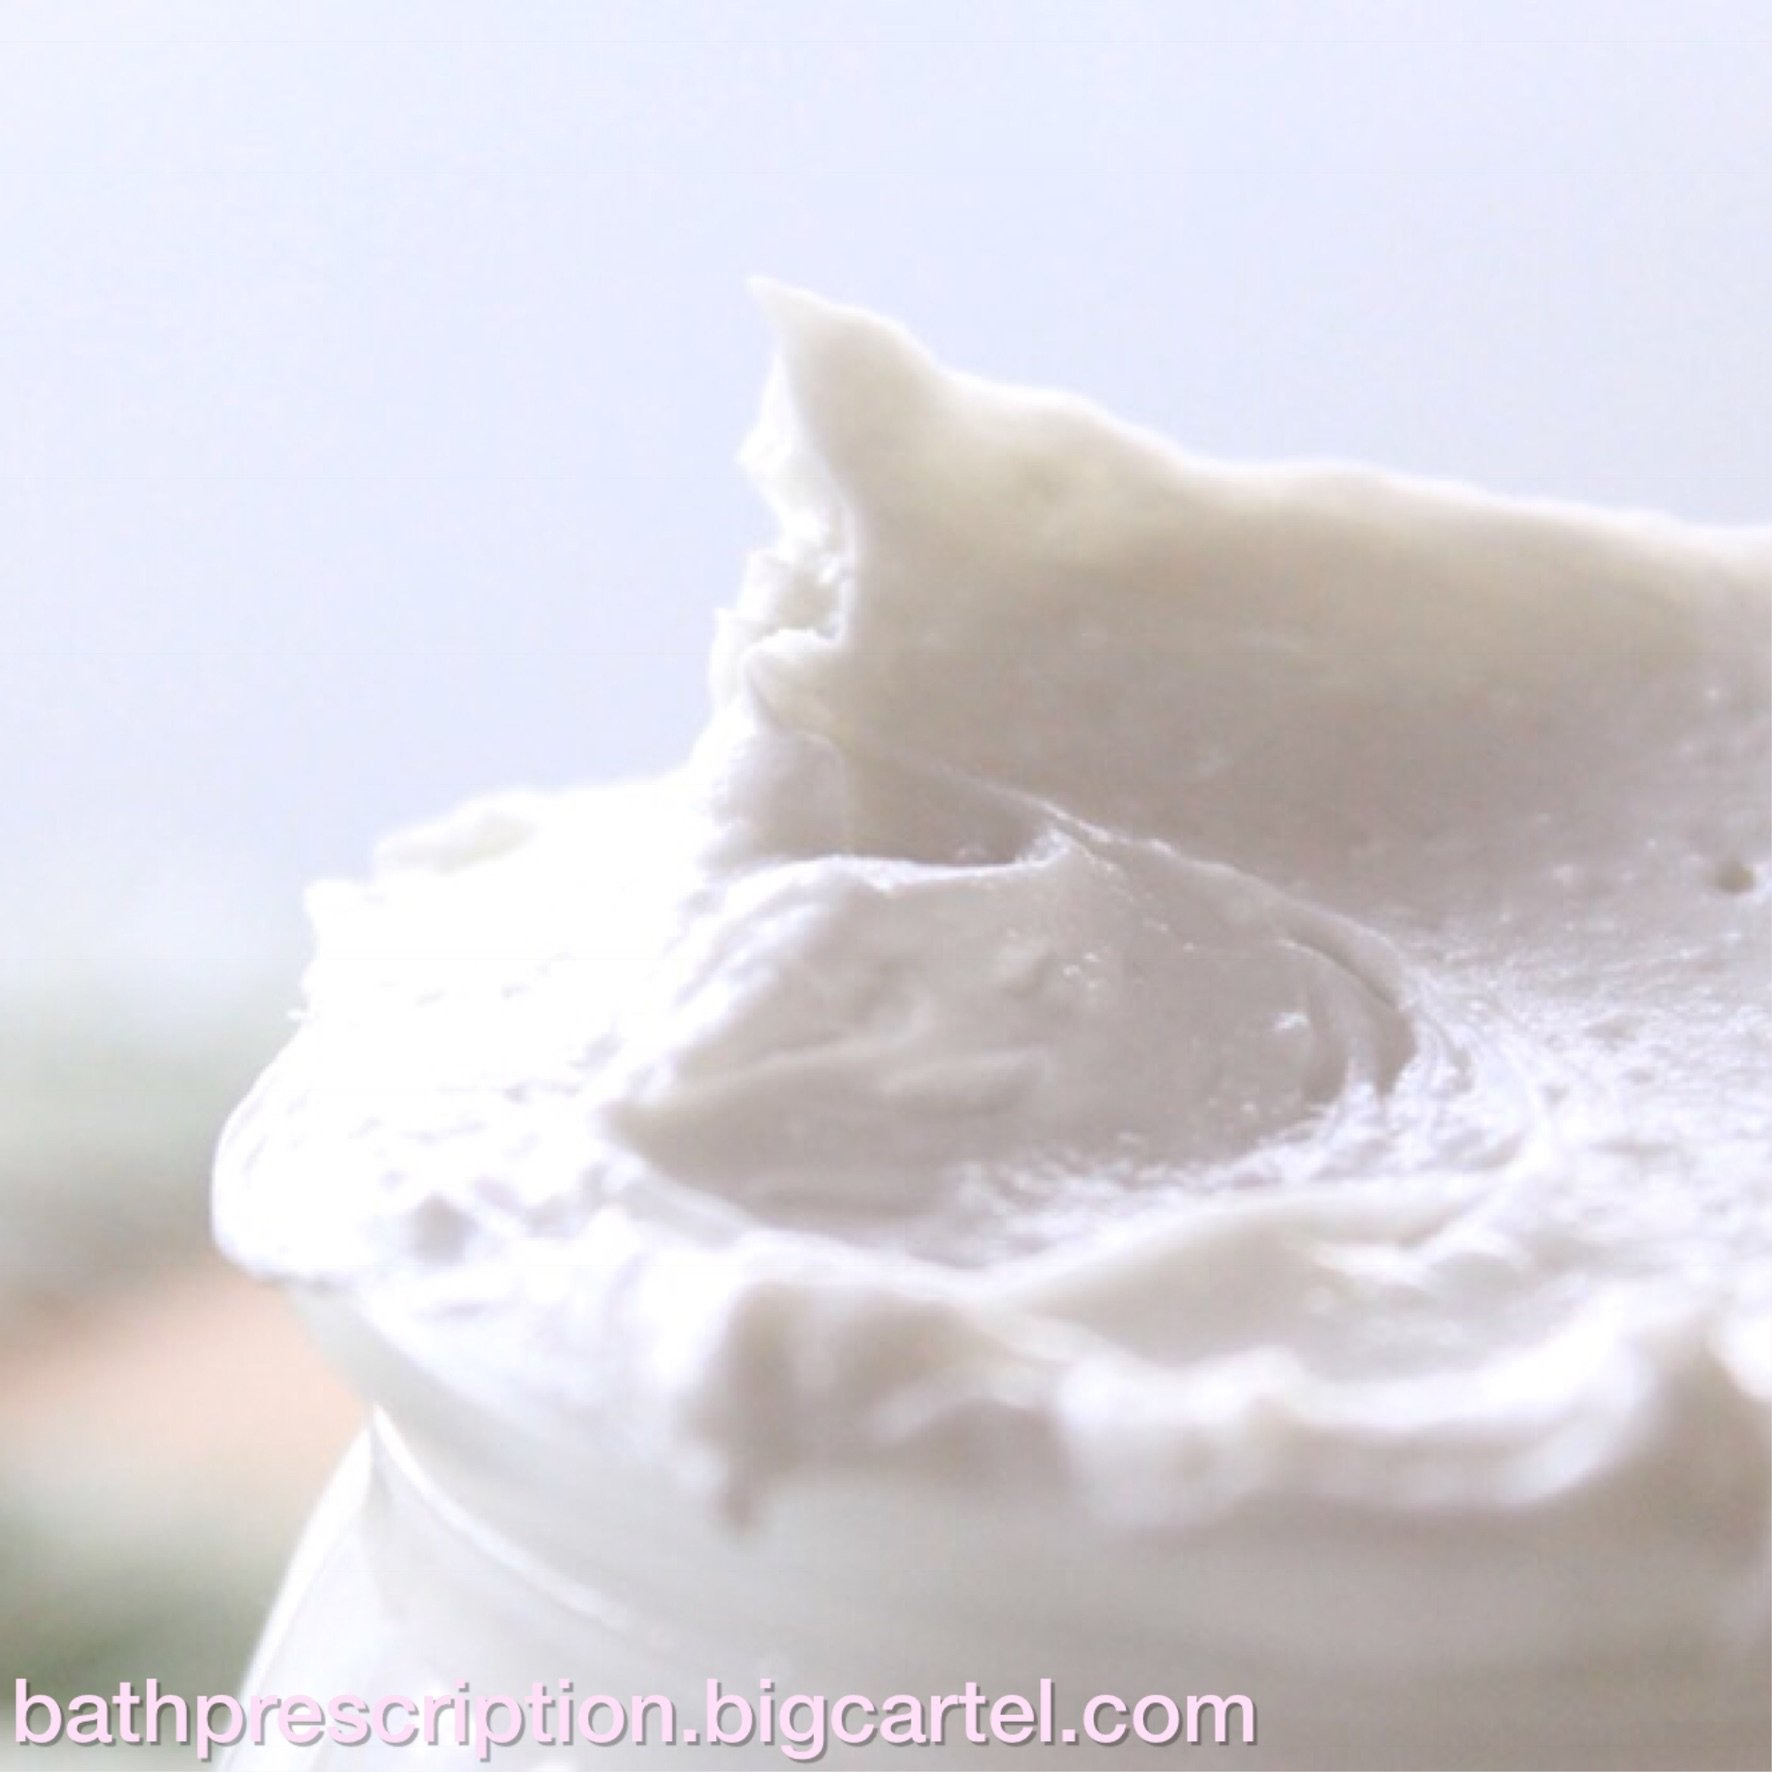 Image of Whipped Body Butter - 2 sizes available 